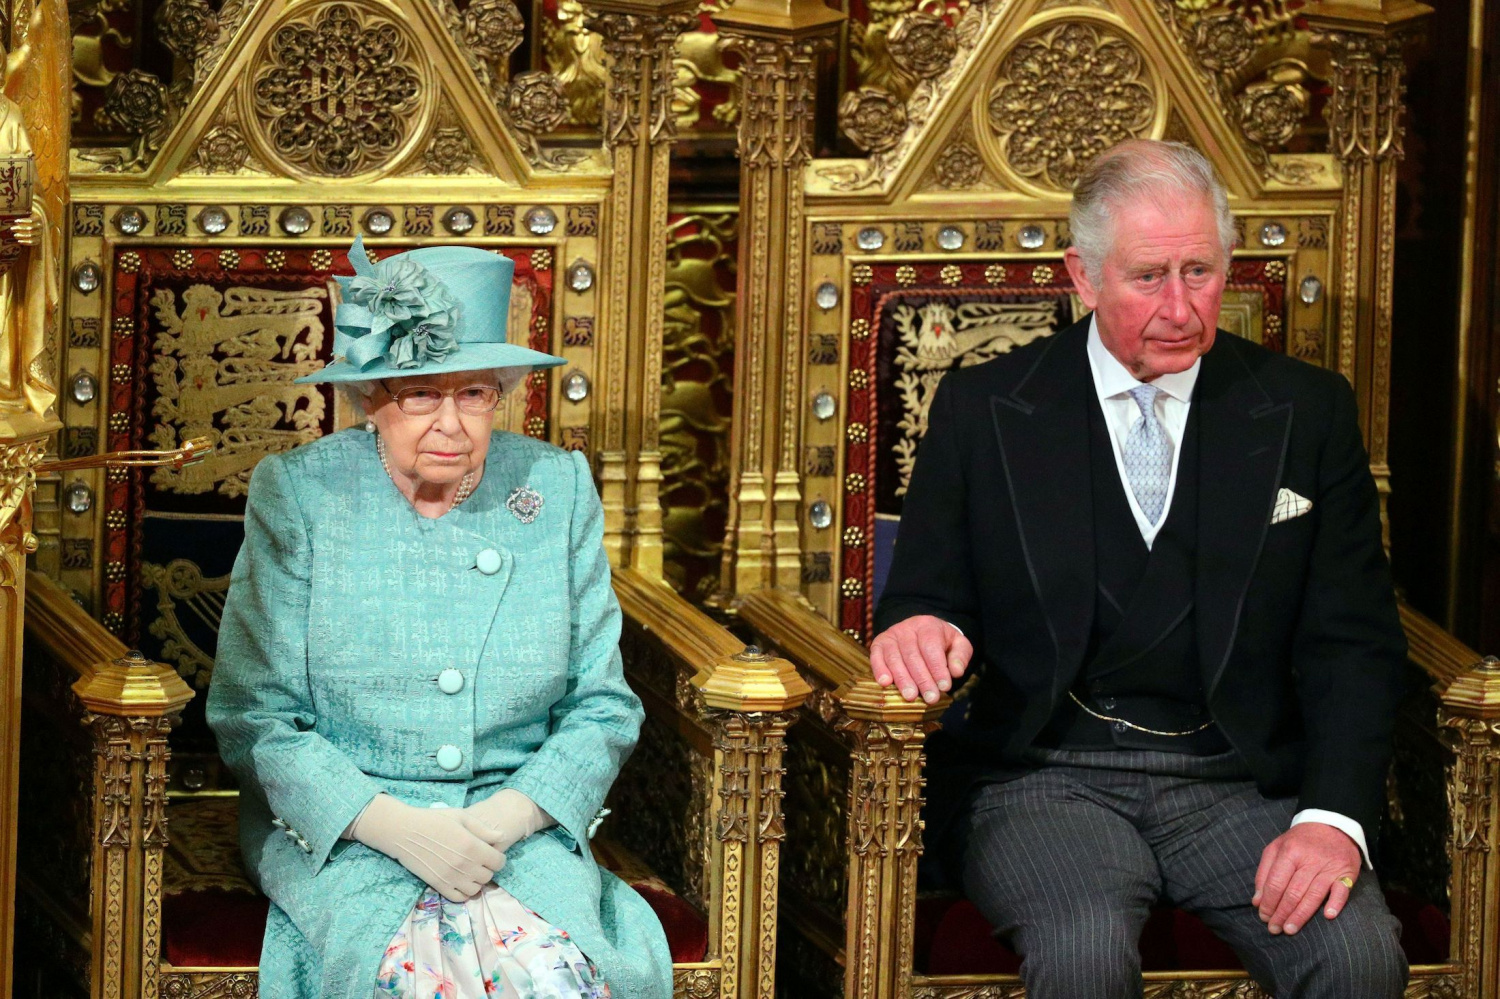 Queen Elizabeth and Charles